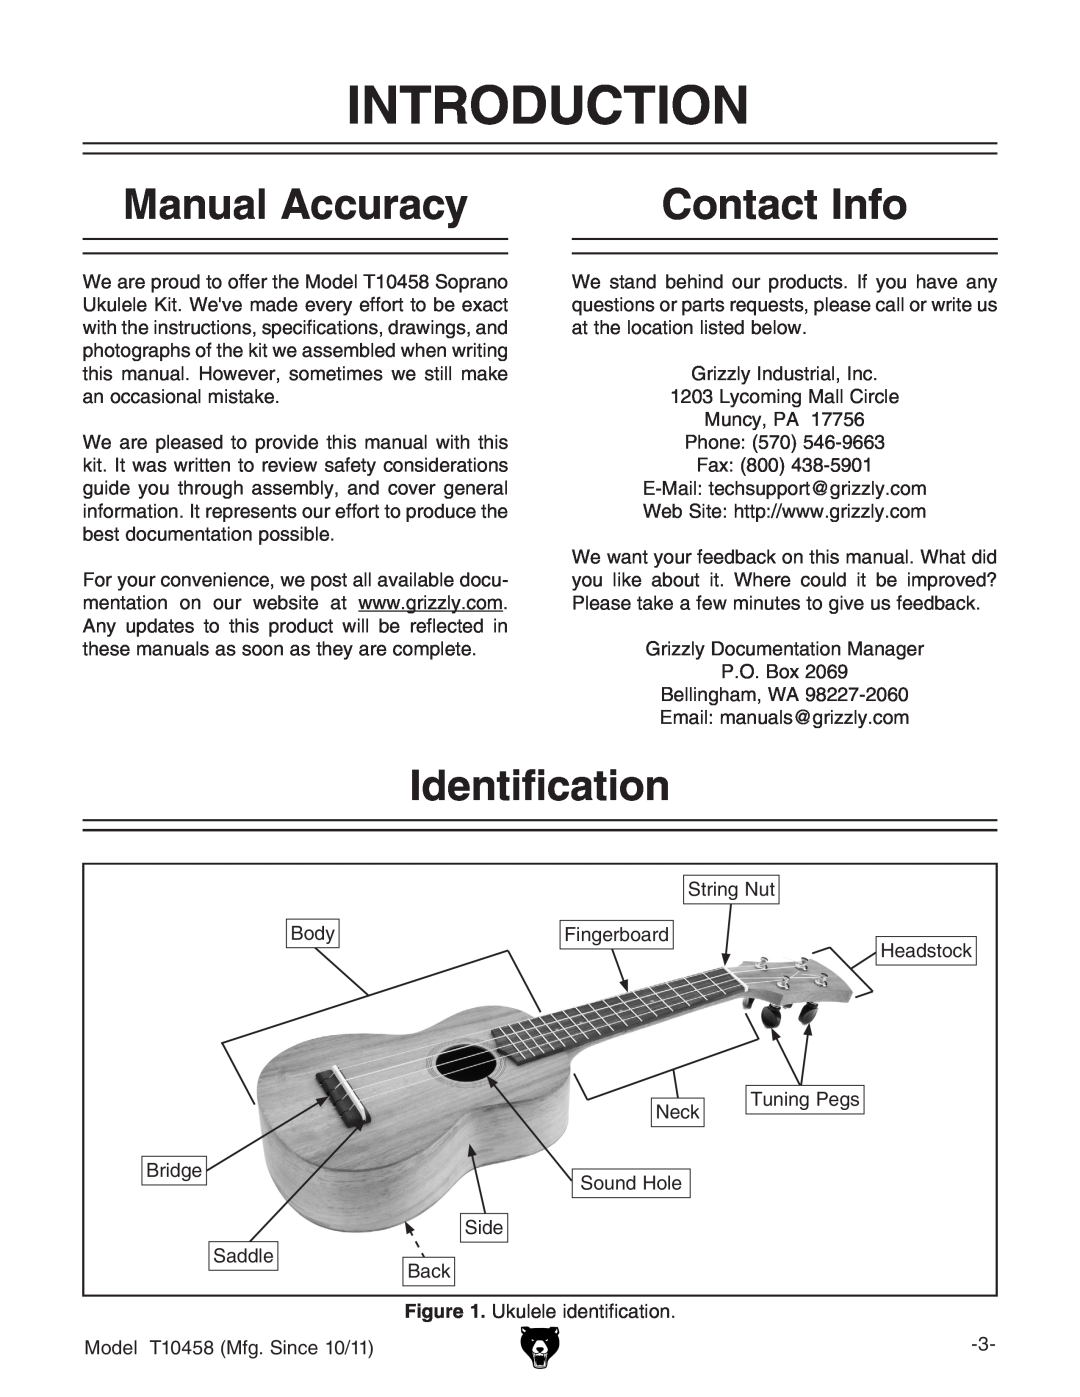 Grizzly T10458 instruction manual Introduction, Manual Accuracy, Contact Info, Identification 